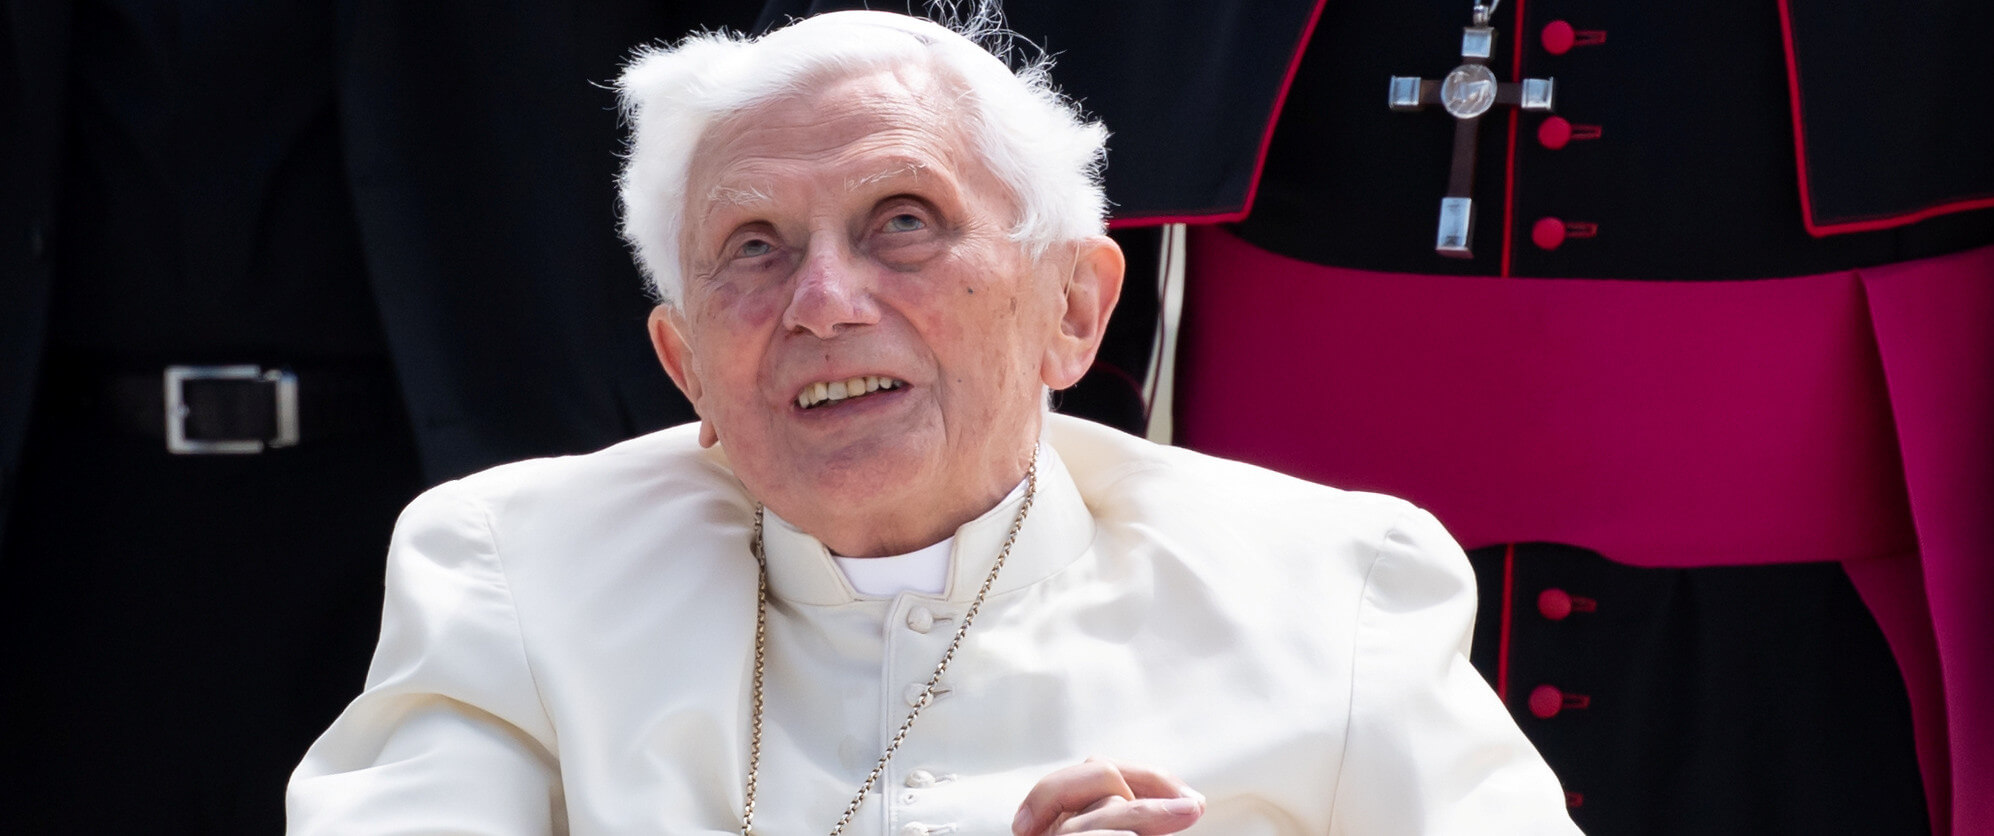 Retired pope to Vatican after visiting his in Germany - Catholic Review